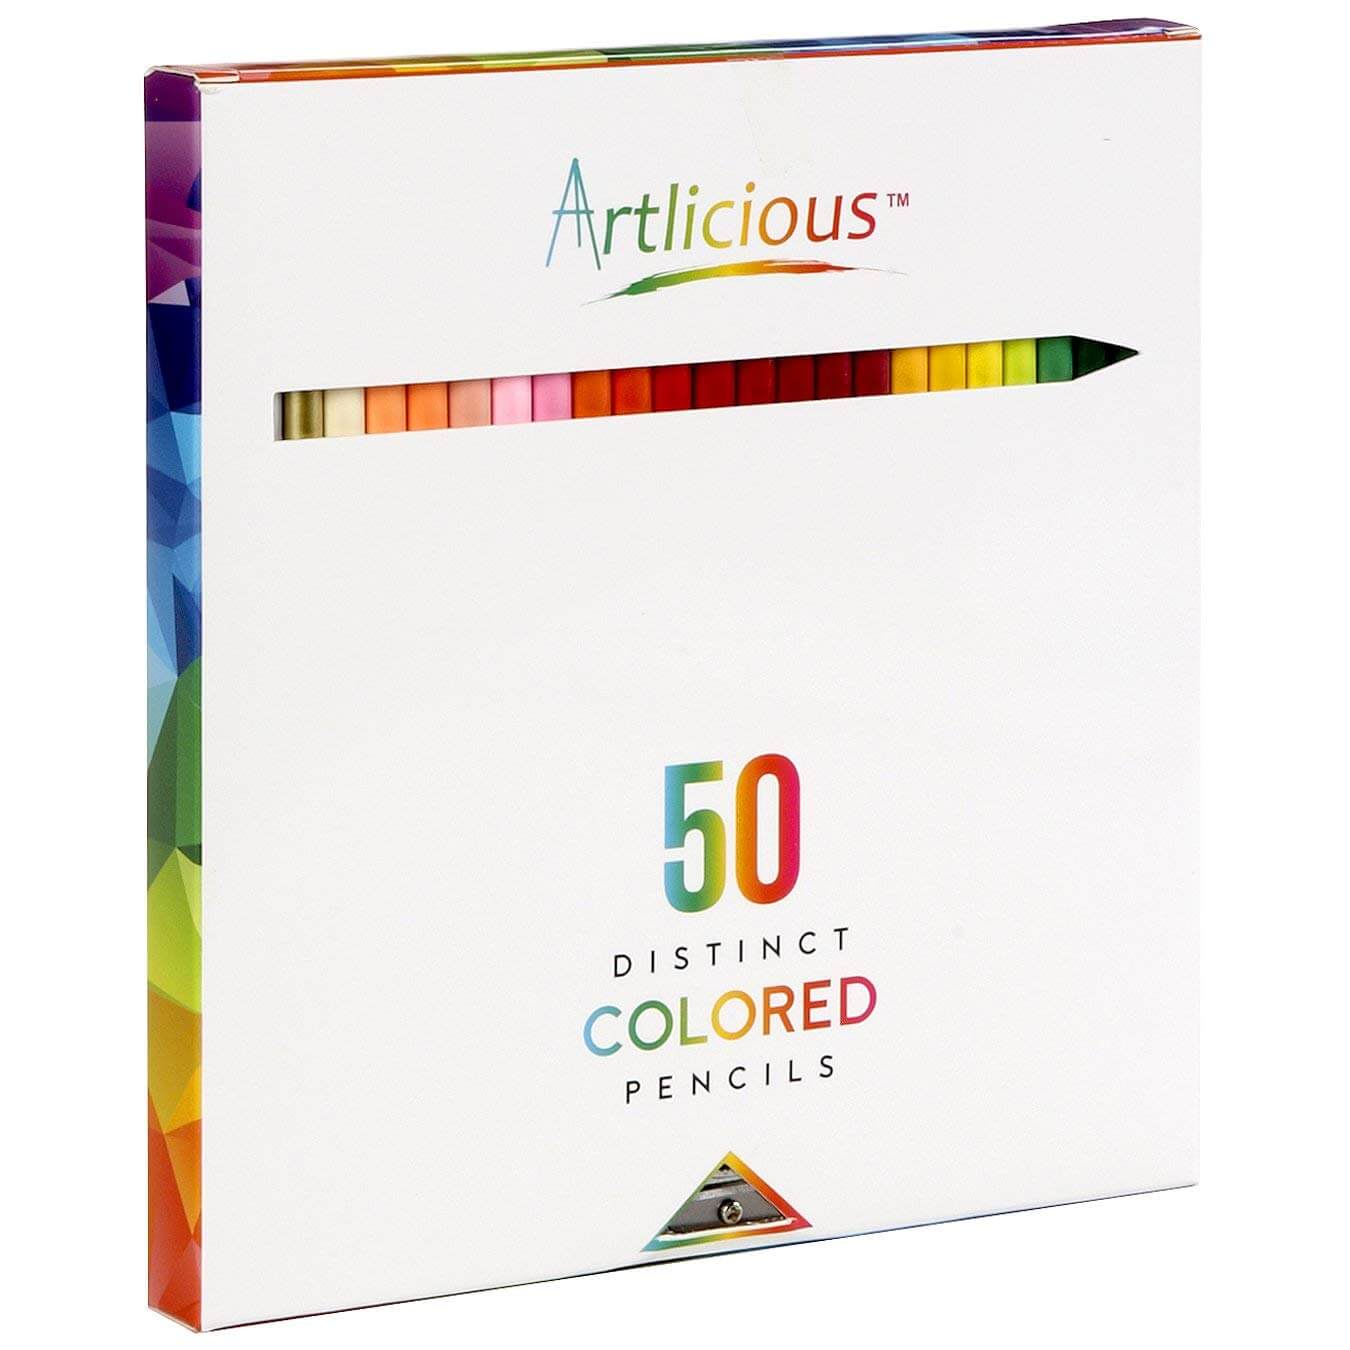  Colored Pencils with Adult Coloring book- Colored Pencils for Adult  Coloring 50 Count  Coloring Books with Coloring Pencils. Premium Artist Coloring  Pencils with coloring books for adults relaxation. 